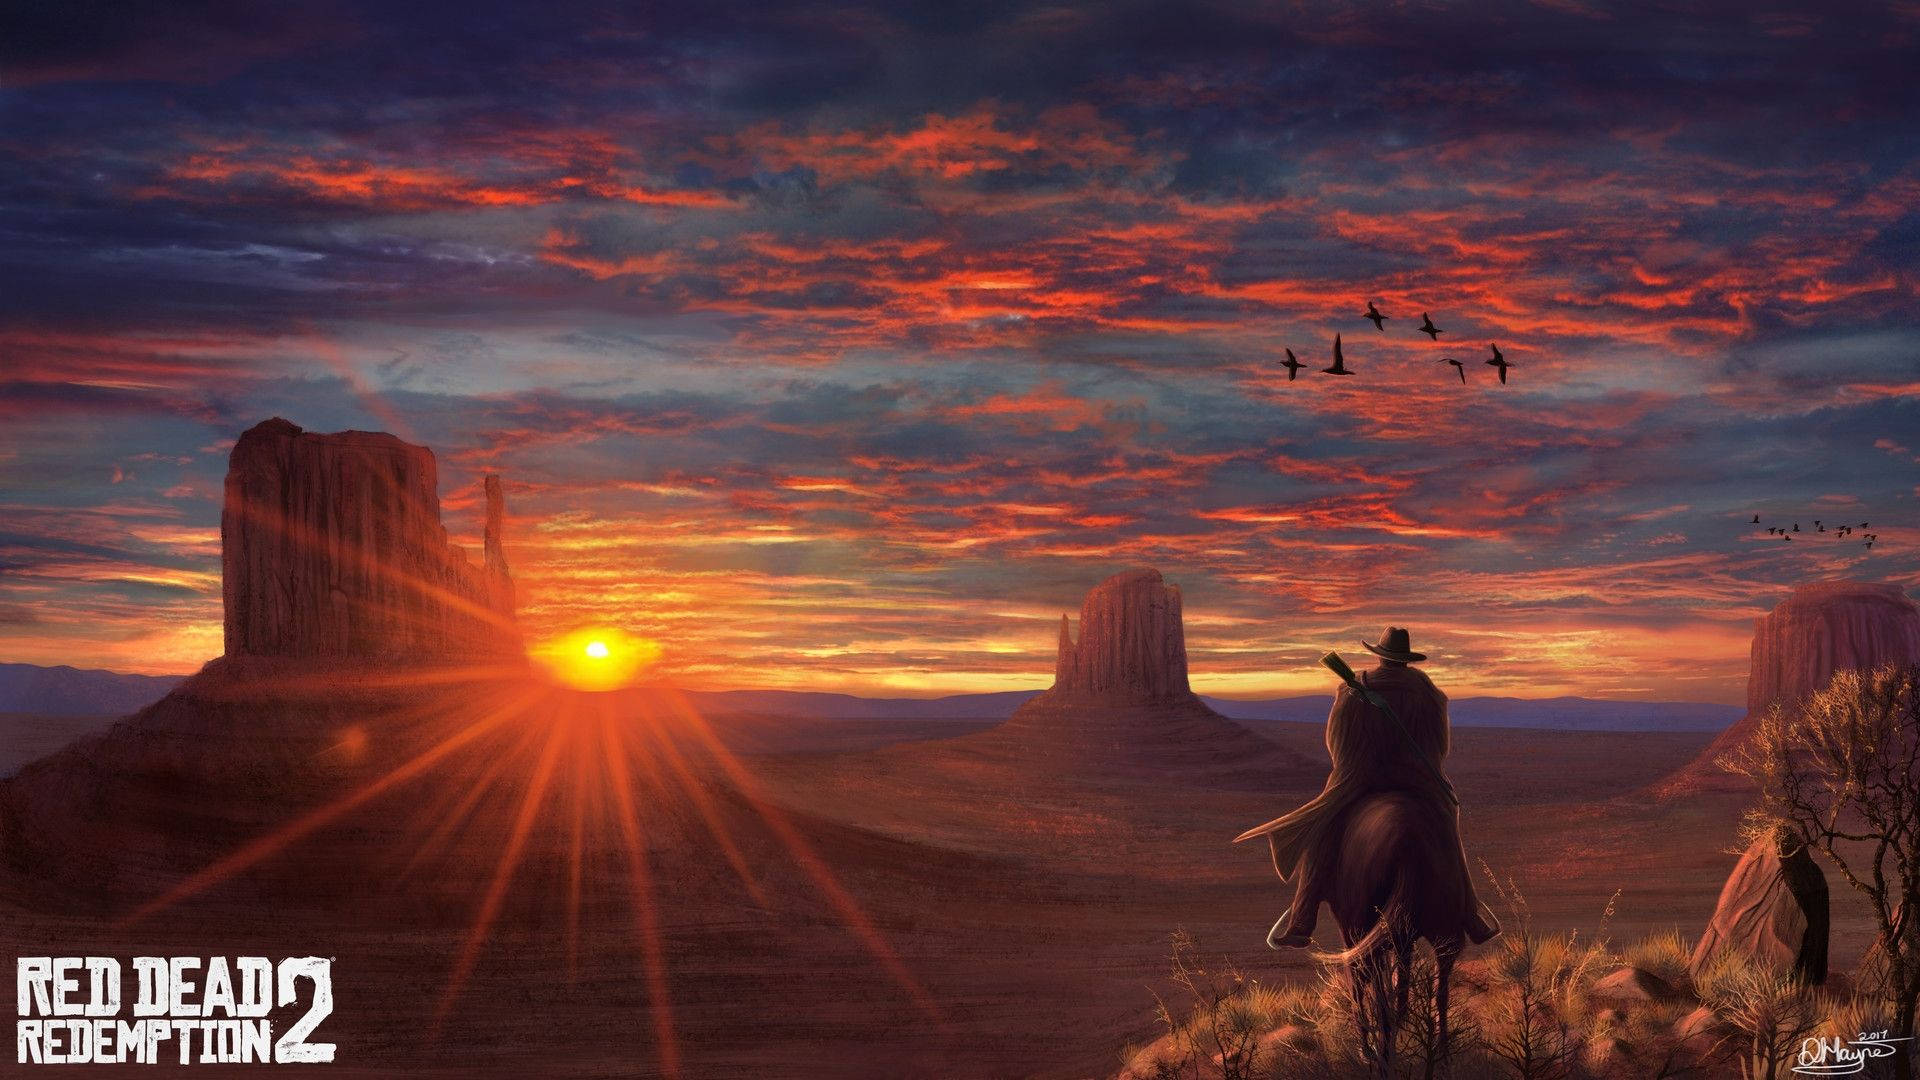 "Red Dead Redemption 2: A journey of honor, courage and freedom" Wallpaper